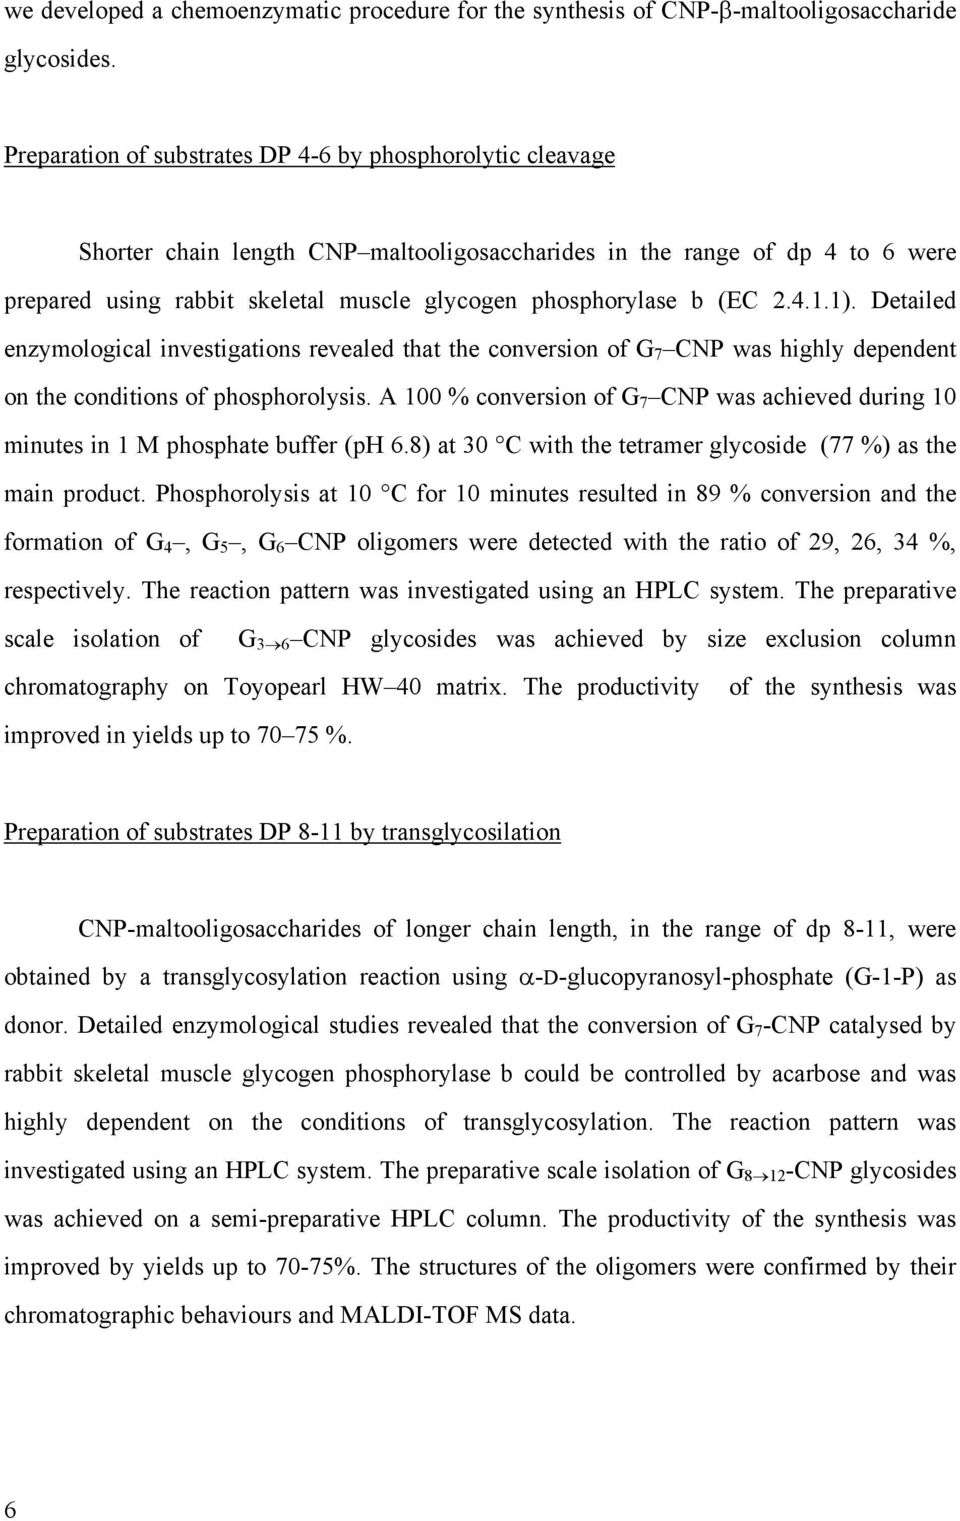 b (EC 2.4.1.1). Detailed enzymological investigations revealed that the conversion of G 7 CNP was highly dependent on the conditions of phosphorolysis.